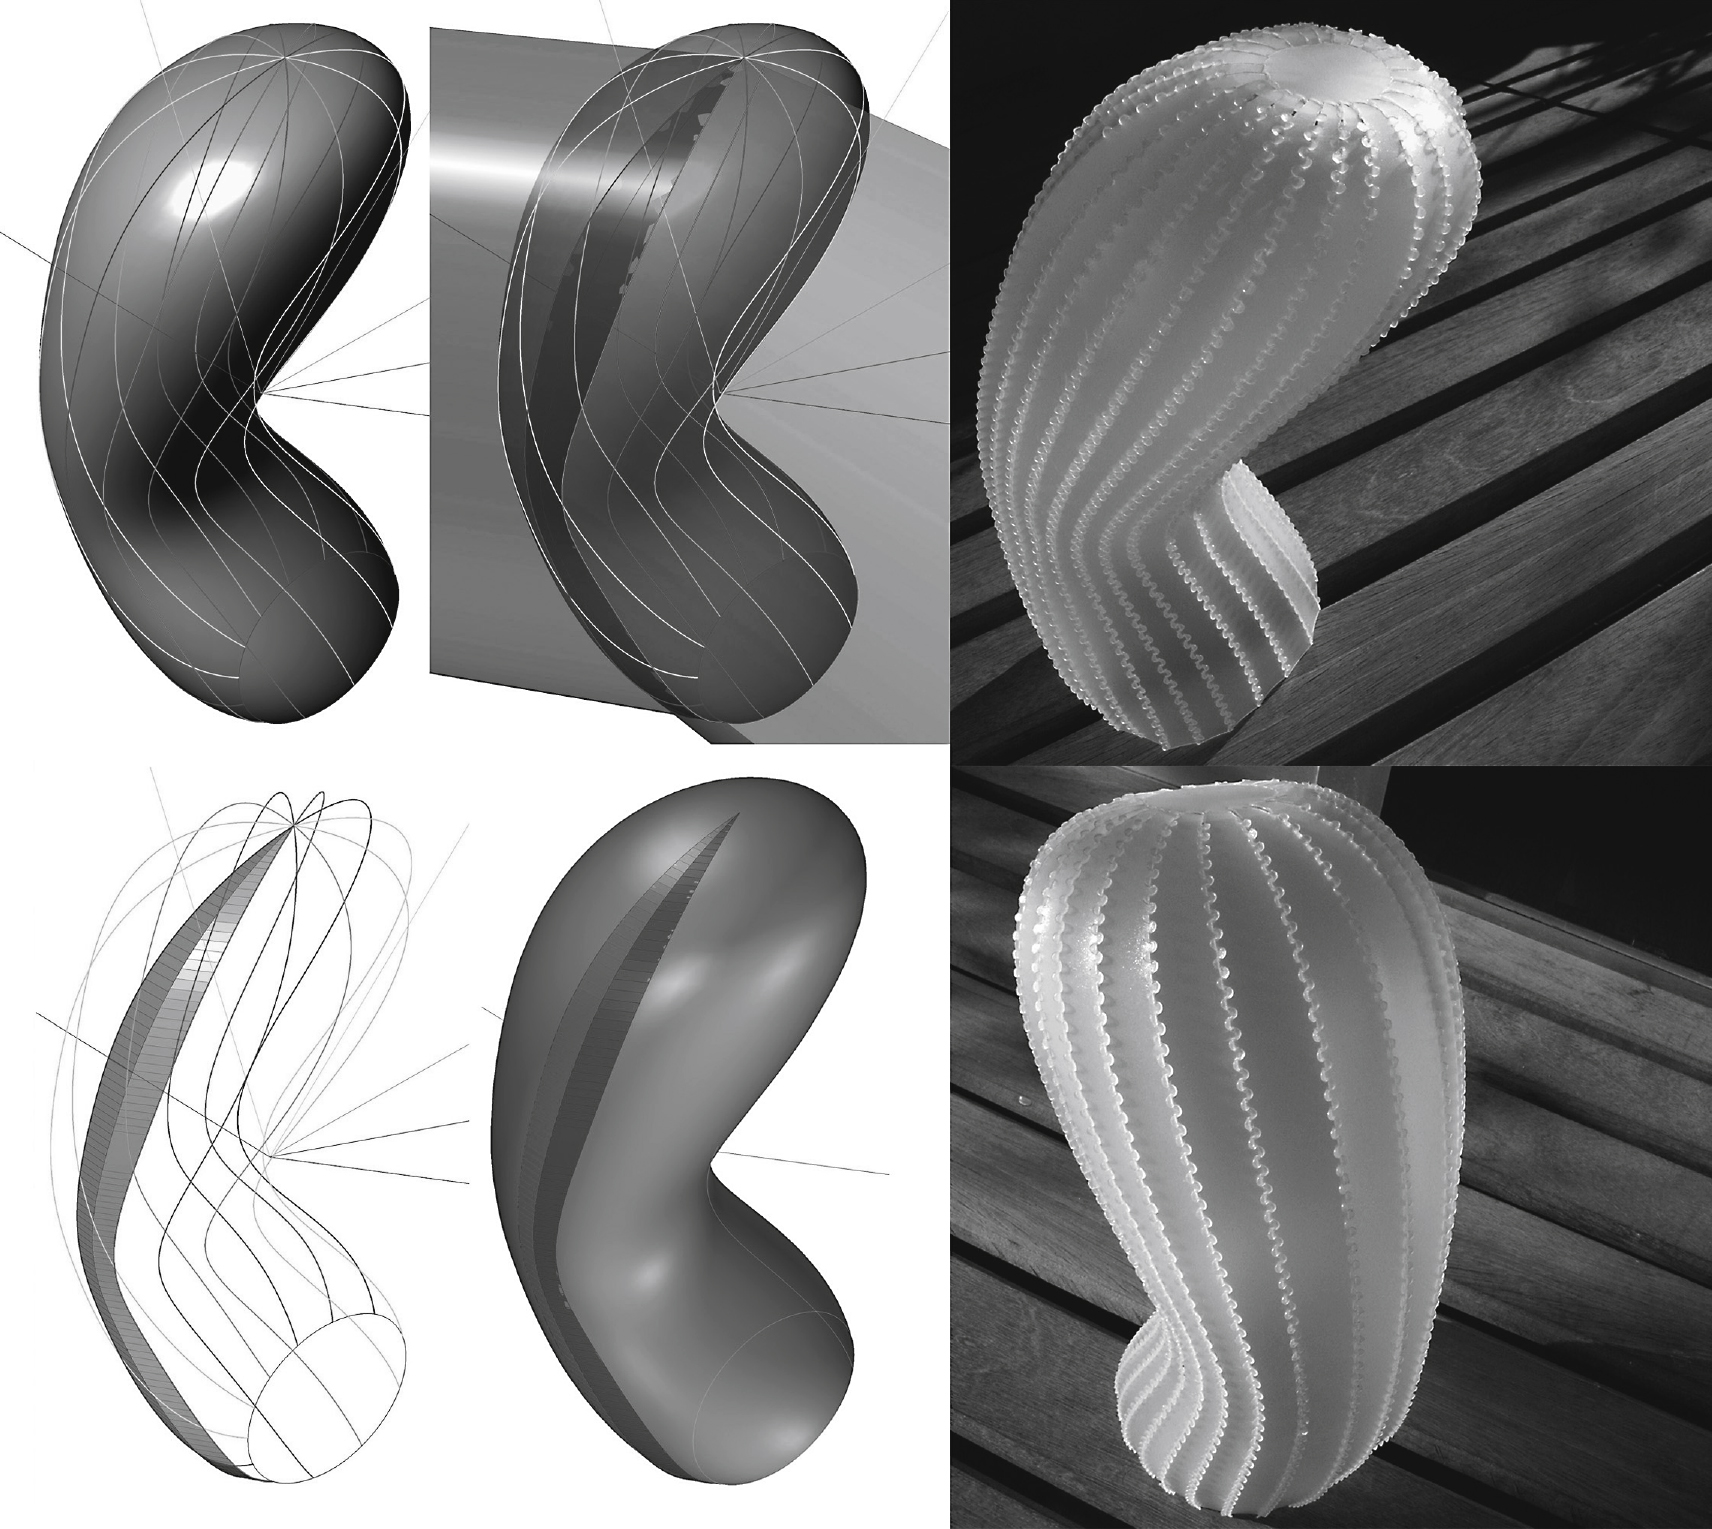 Development of freeform surface. Application of the method on a freeform surface by a straight improper trajectory. Physical model made applying the process.